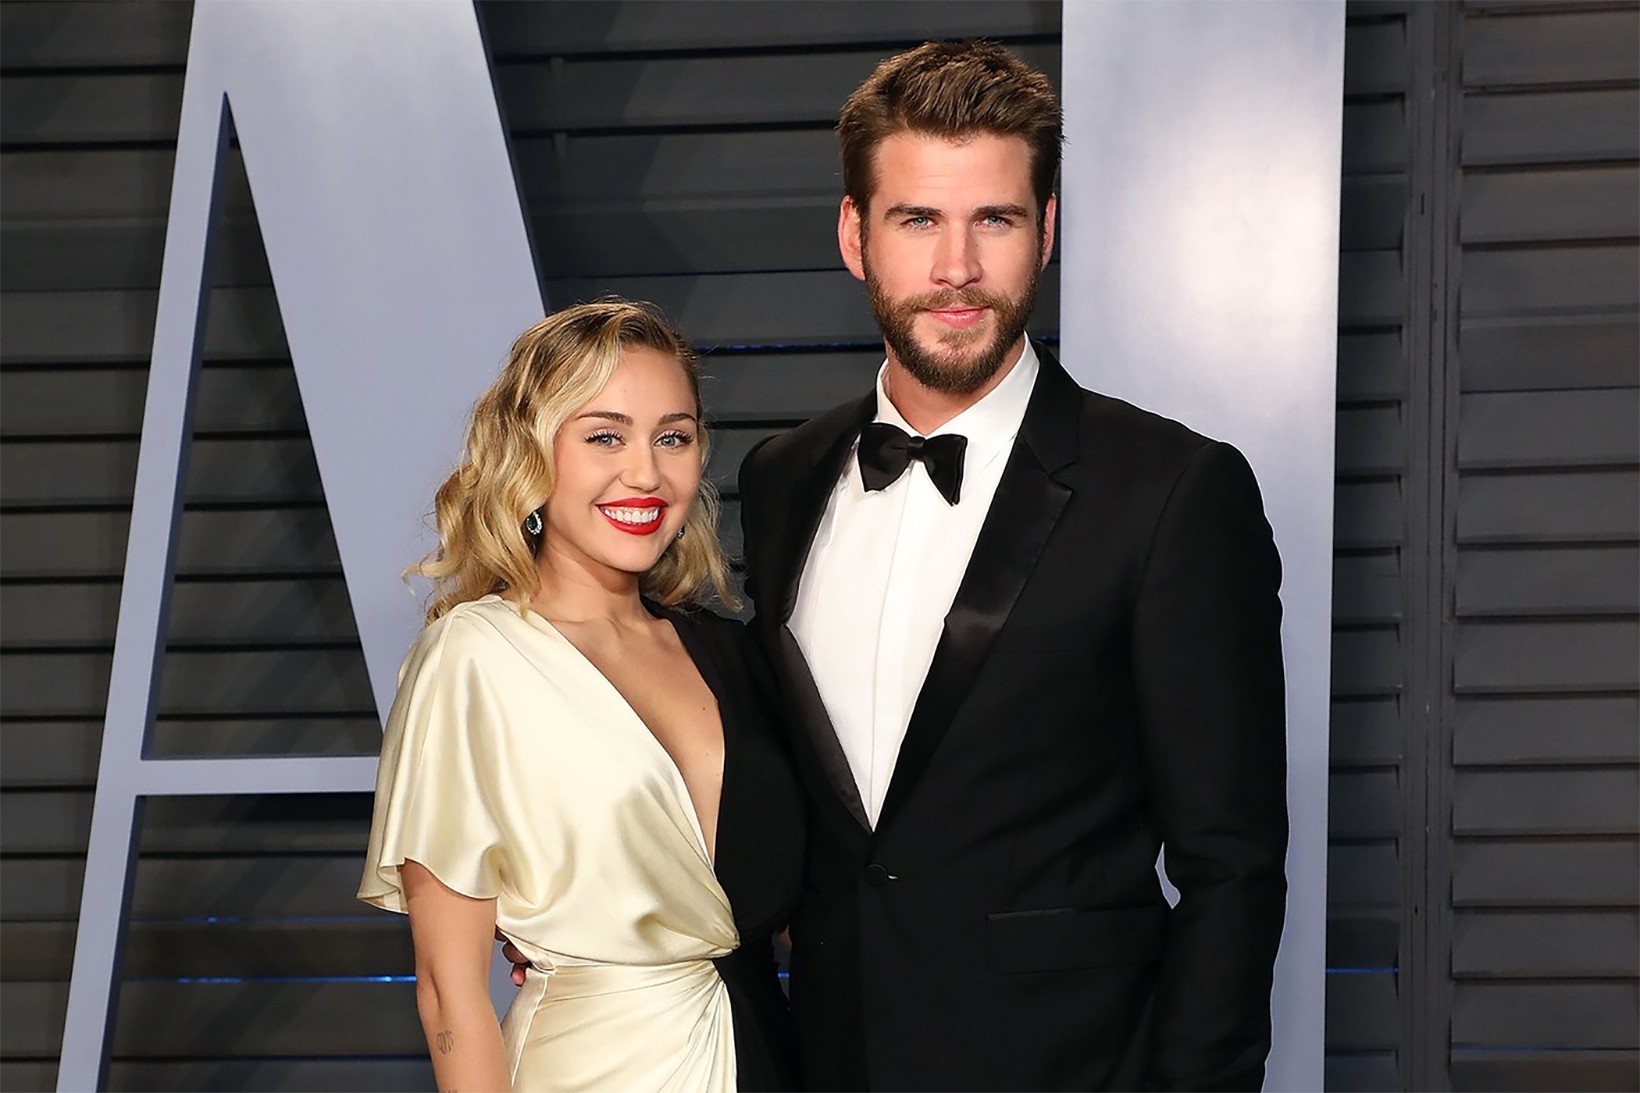 Miley Cyrus Breaks Silence After Liam Hemsworth Files for Divorce